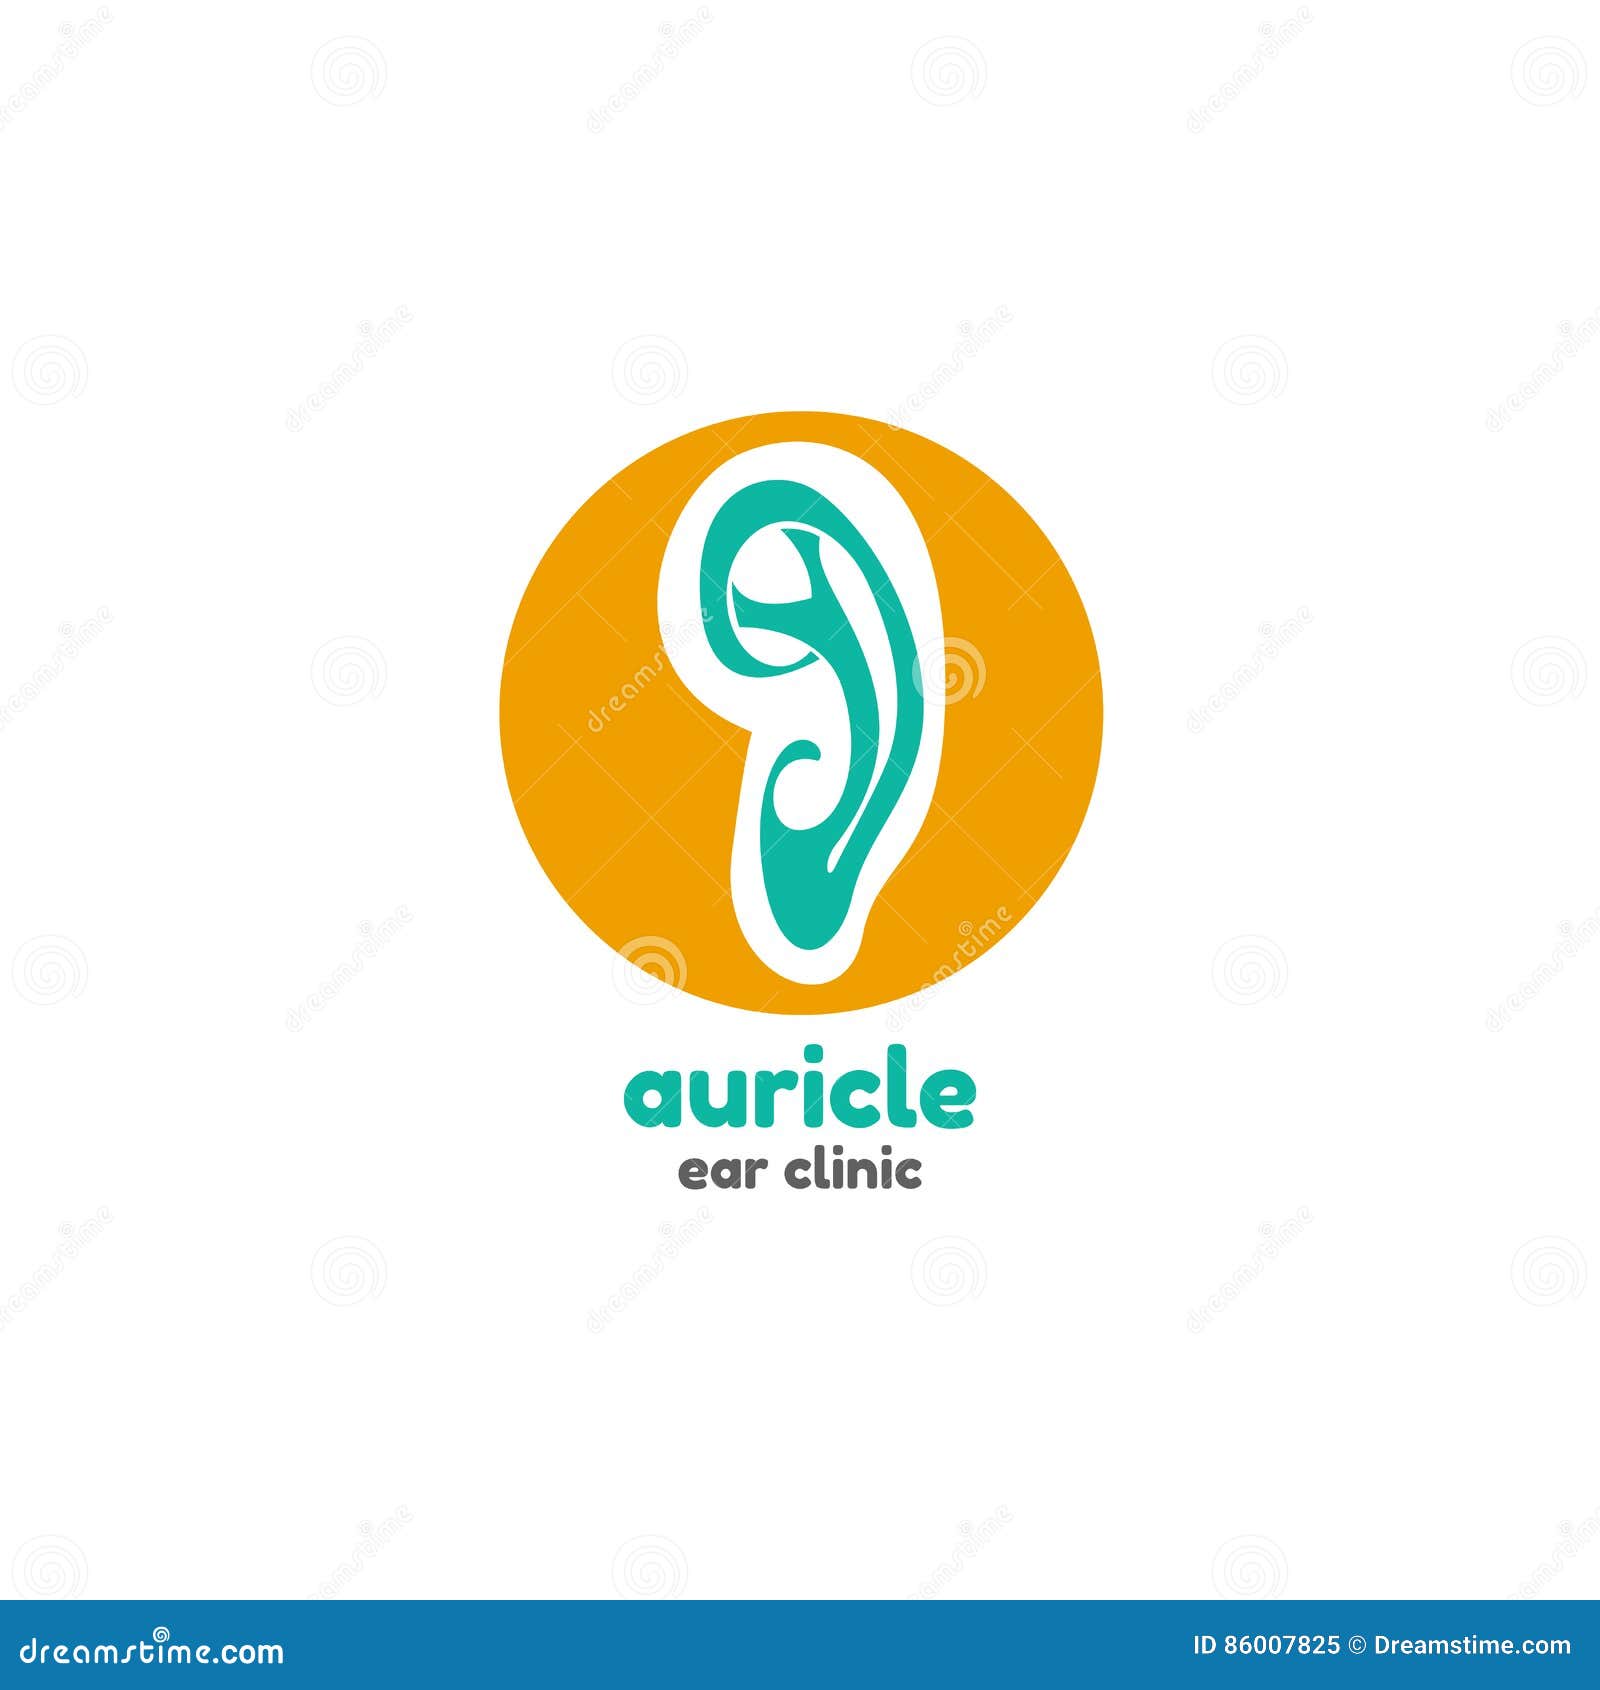 template logo for auricle